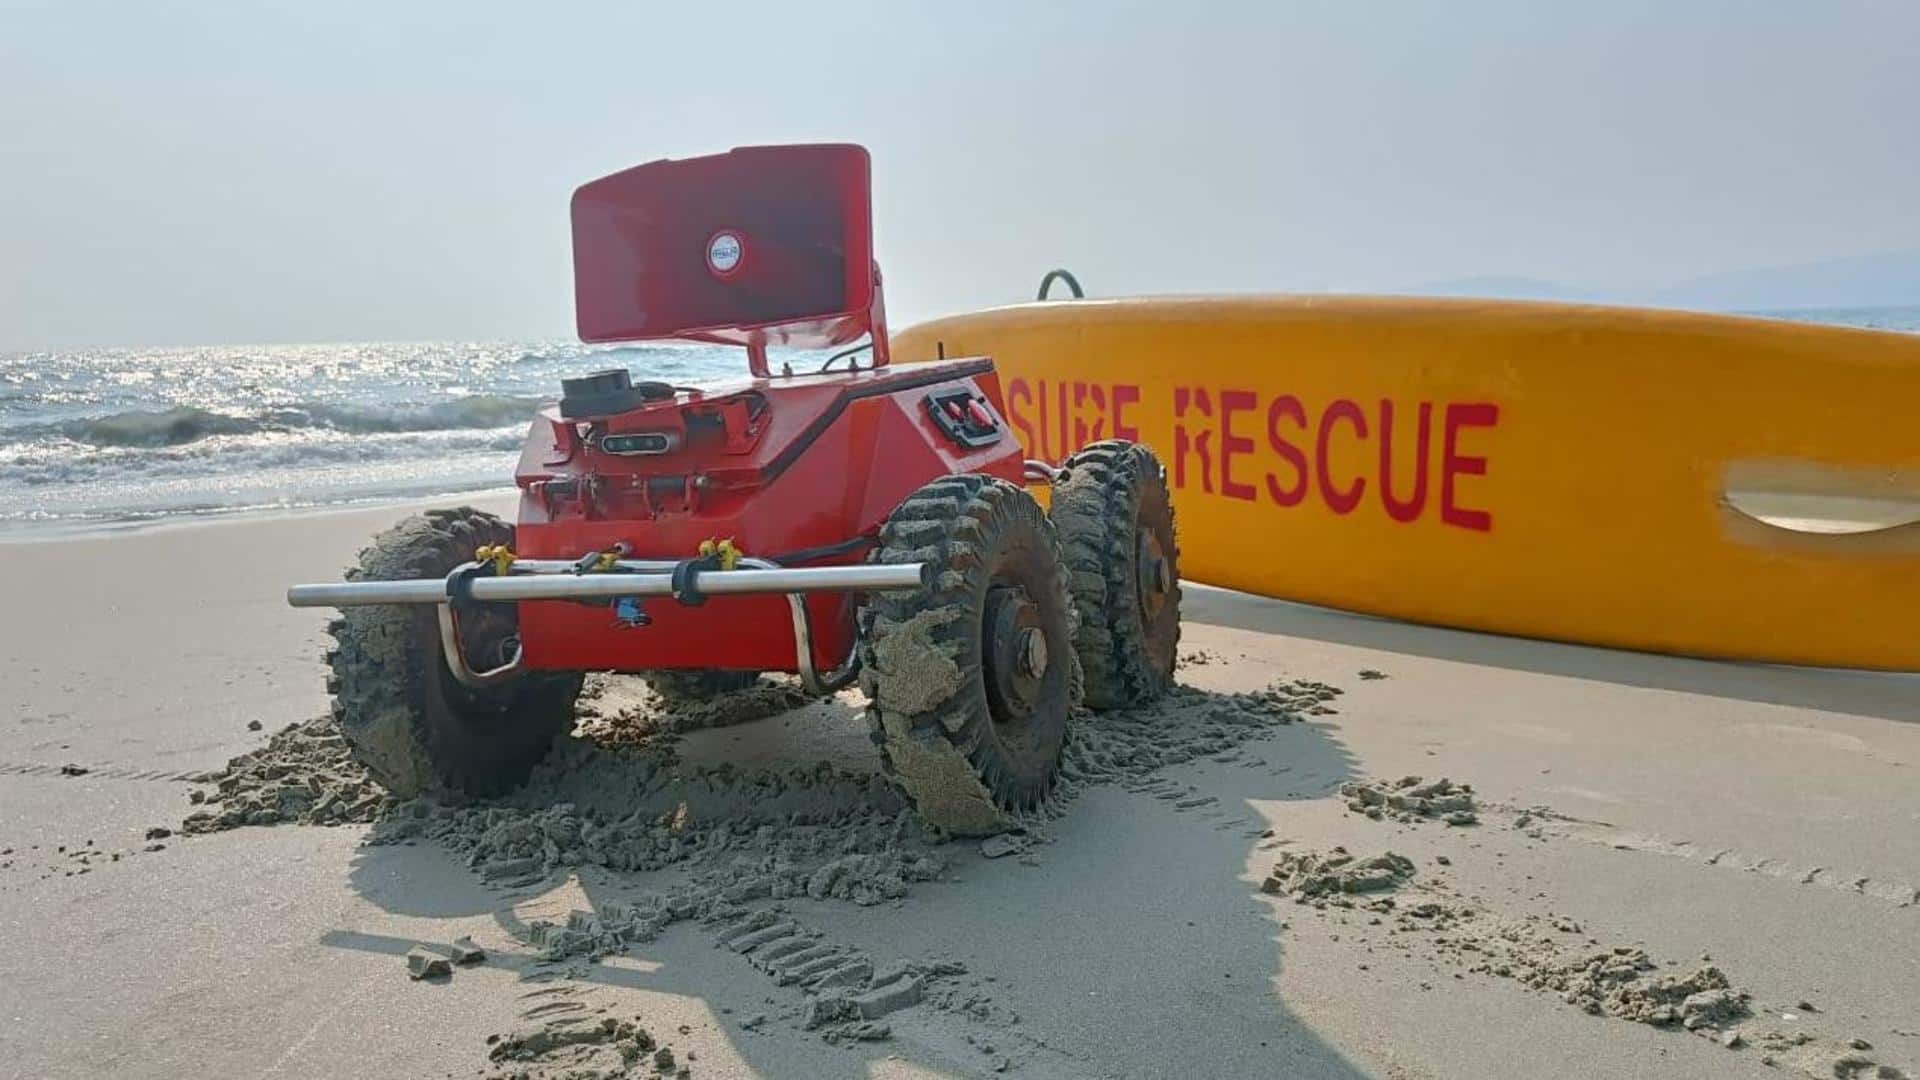 Lifeguards in Goa get AI assistance for rescue operations